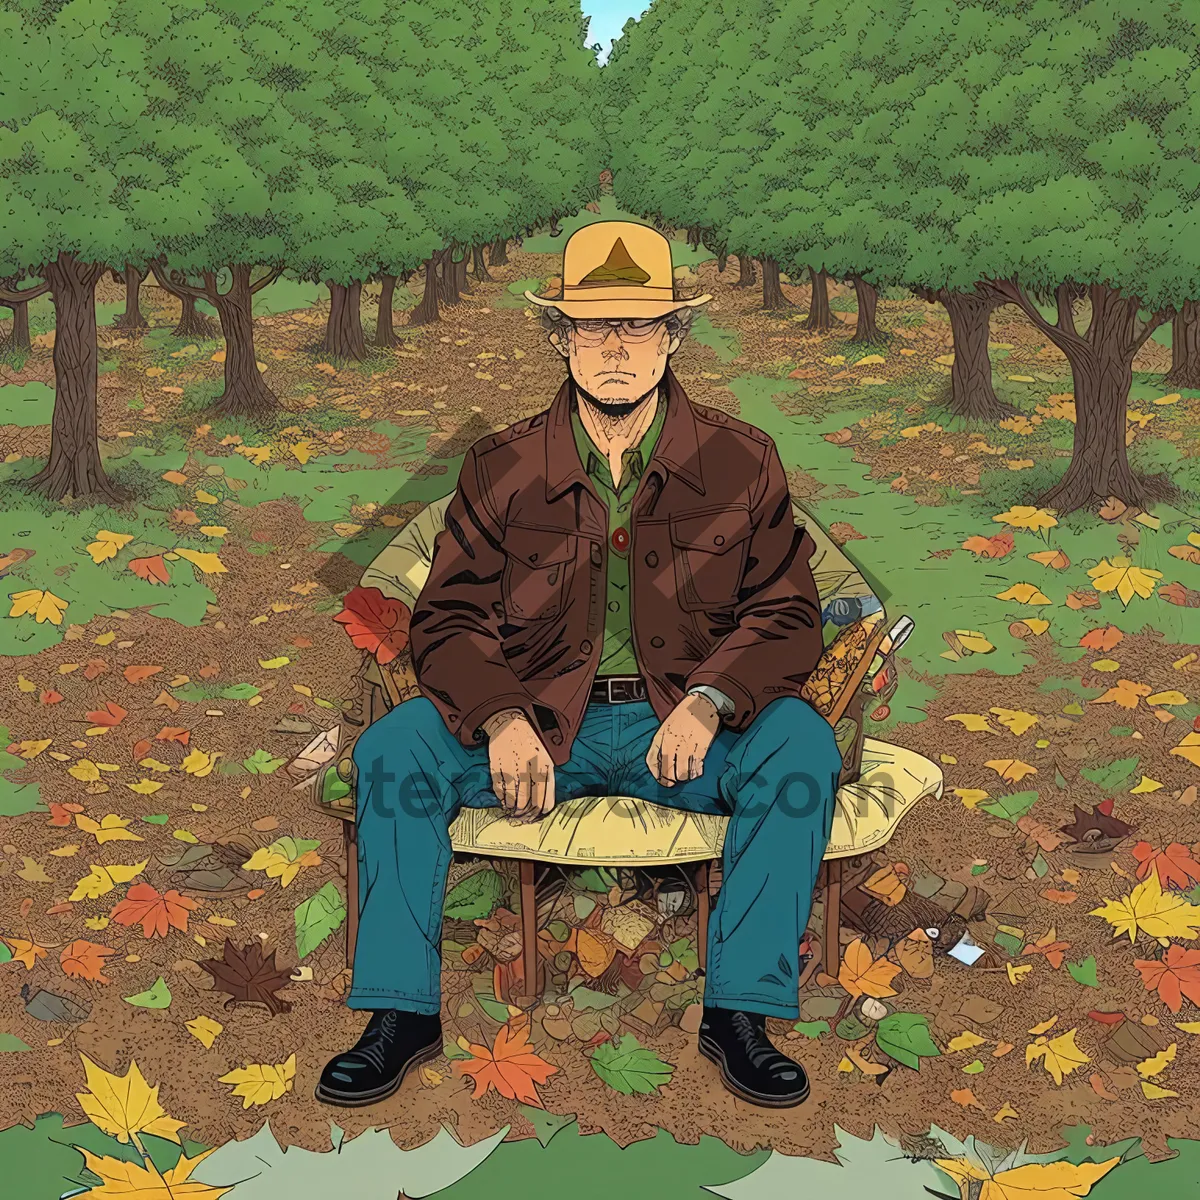 Picture of Autumn Farmer in Park Surrounded by Nature